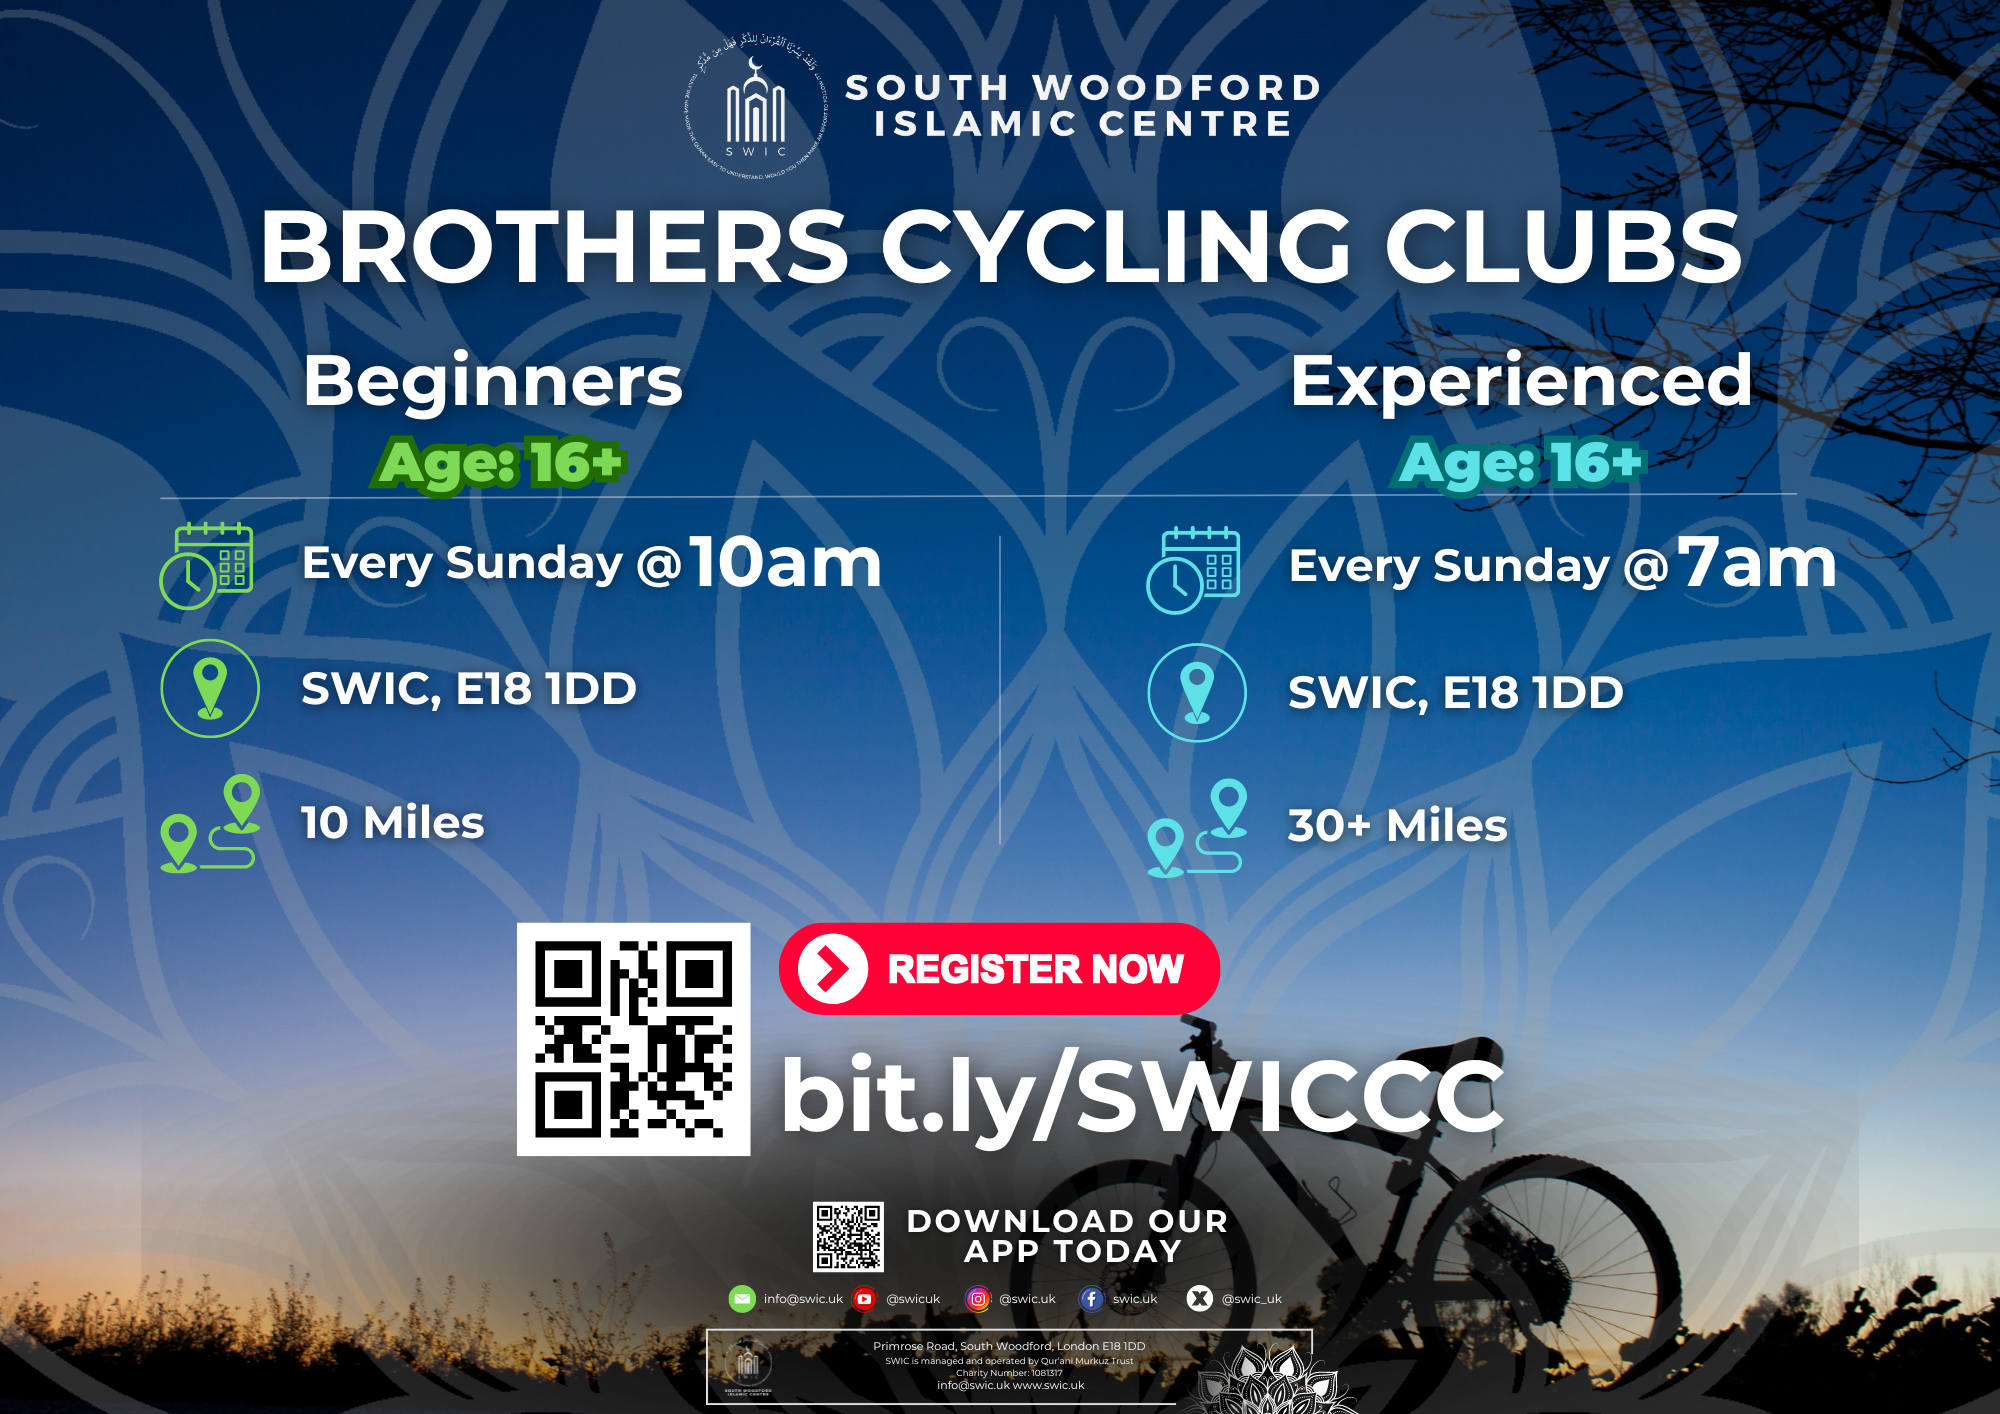 Brothers Cycling Clubs - Tap here for registration link